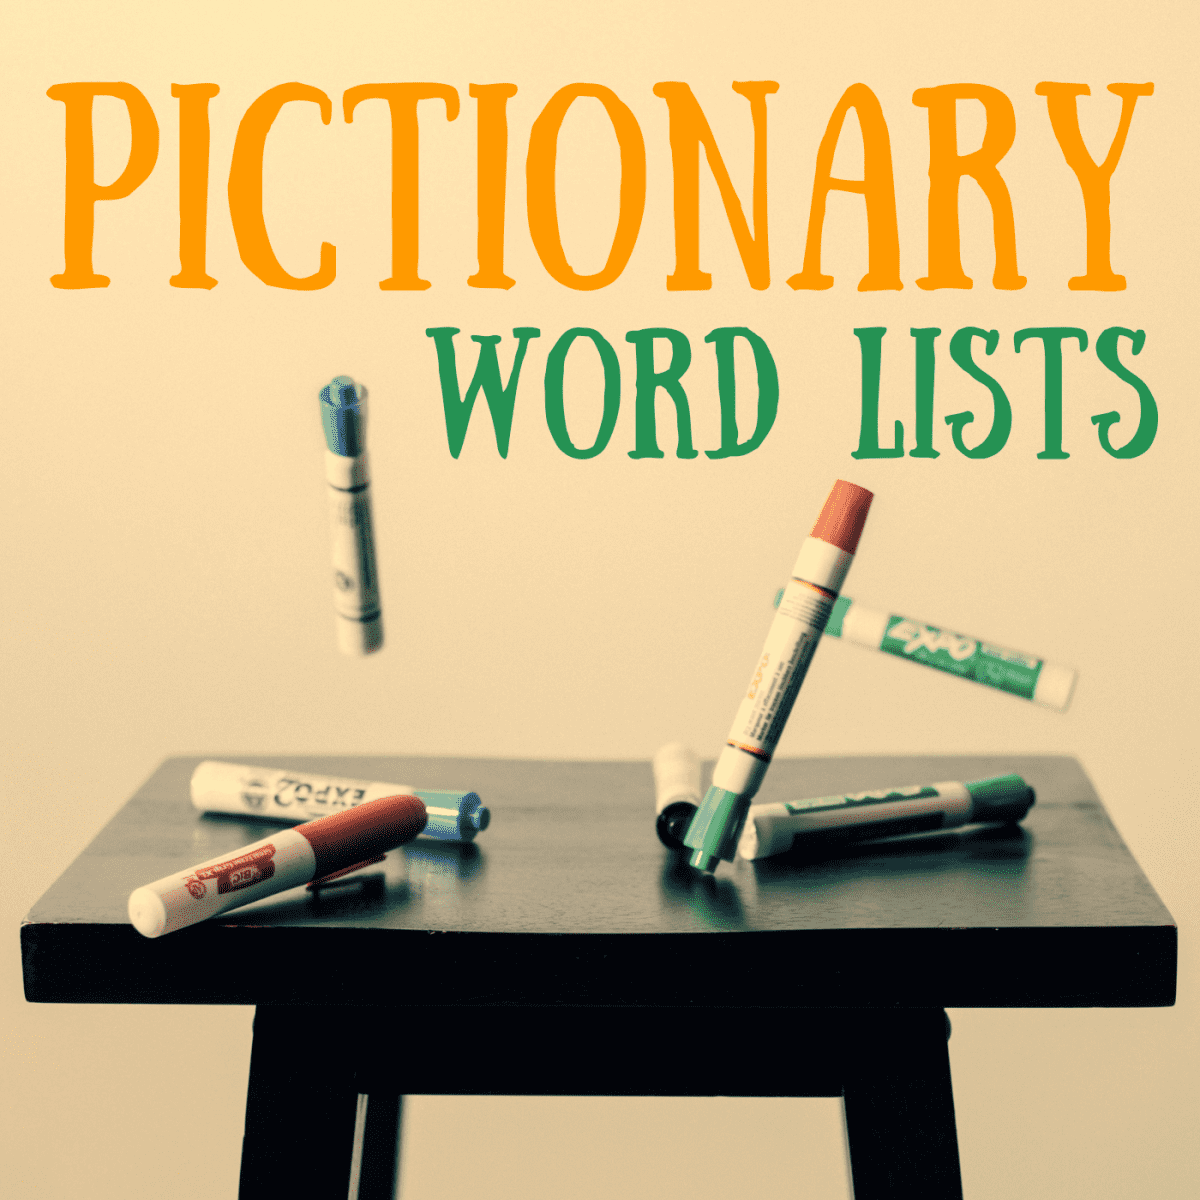 List of Pictionary words - medium difficulty  Pictionary words, Pictionary  word list, Pictionary